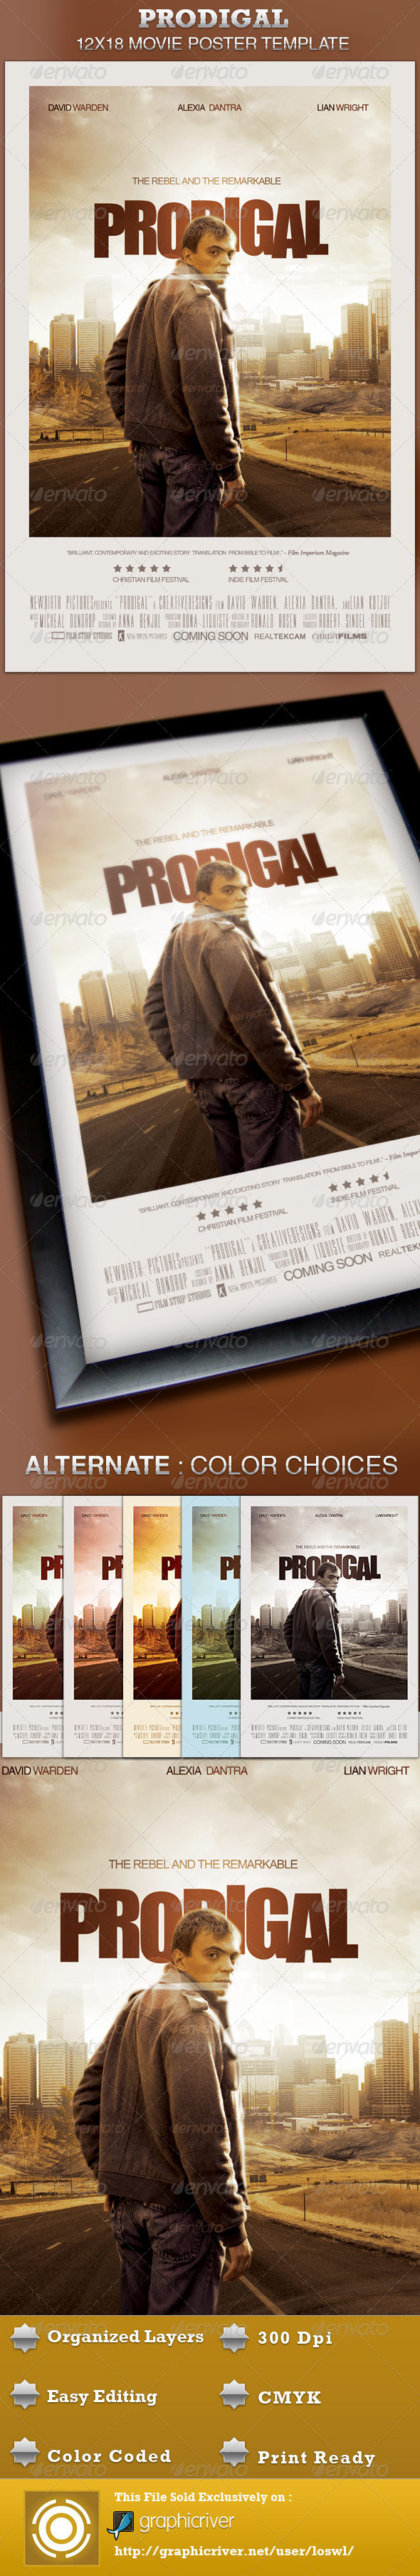 movie-poster-credit-template-for-photoshop-dondrup